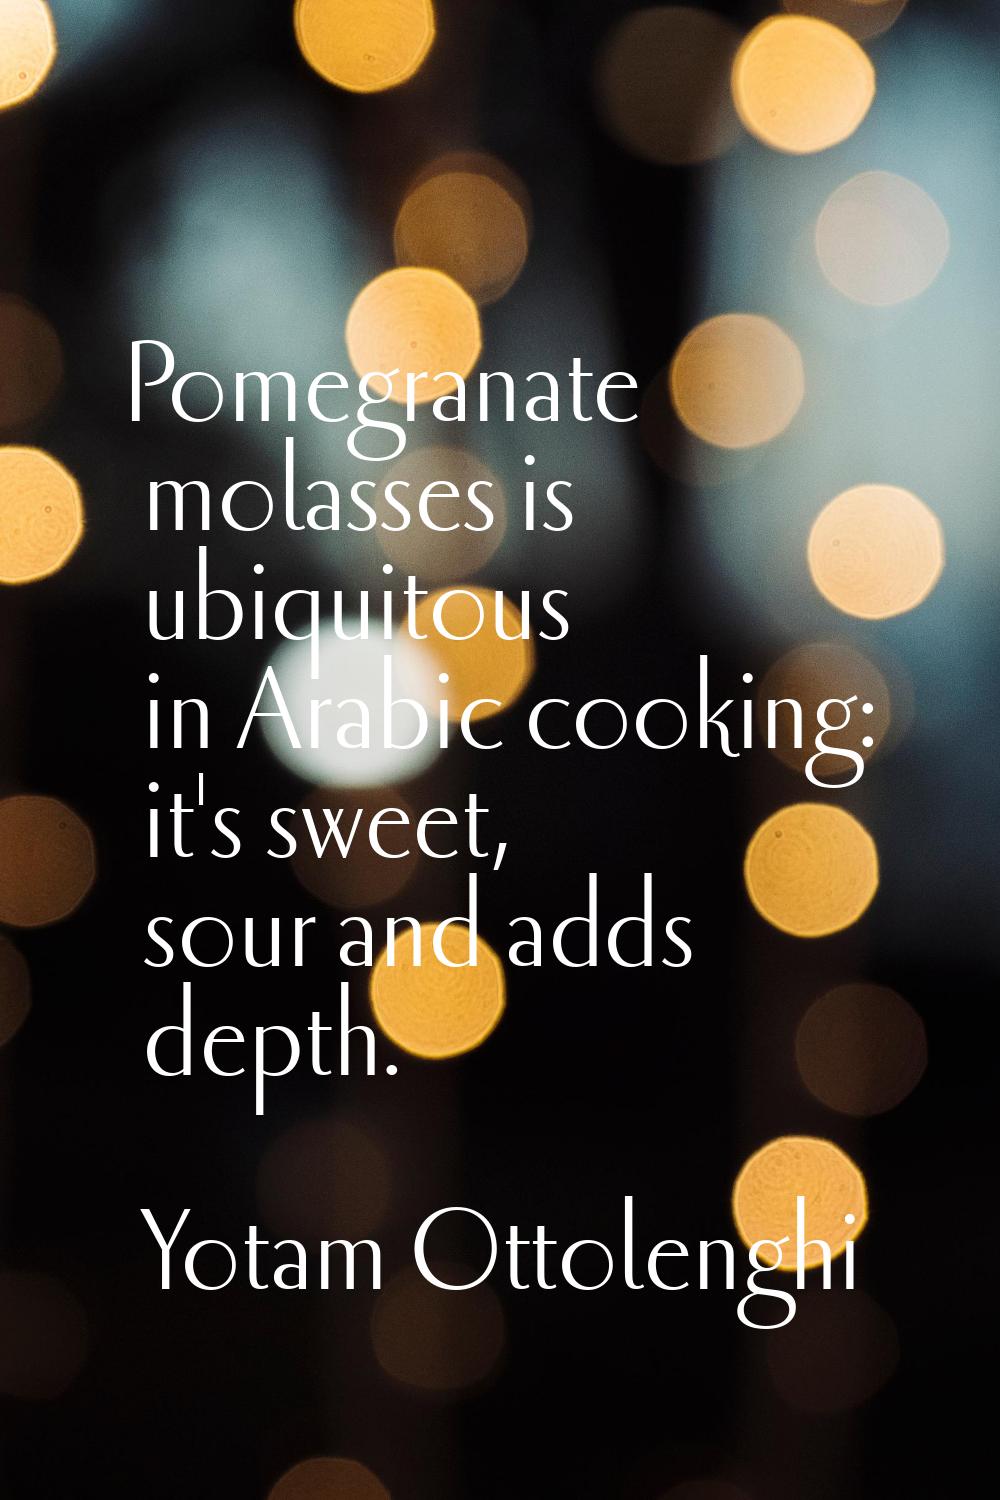 Pomegranate molasses is ubiquitous in Arabic cooking: it's sweet, sour and adds depth.